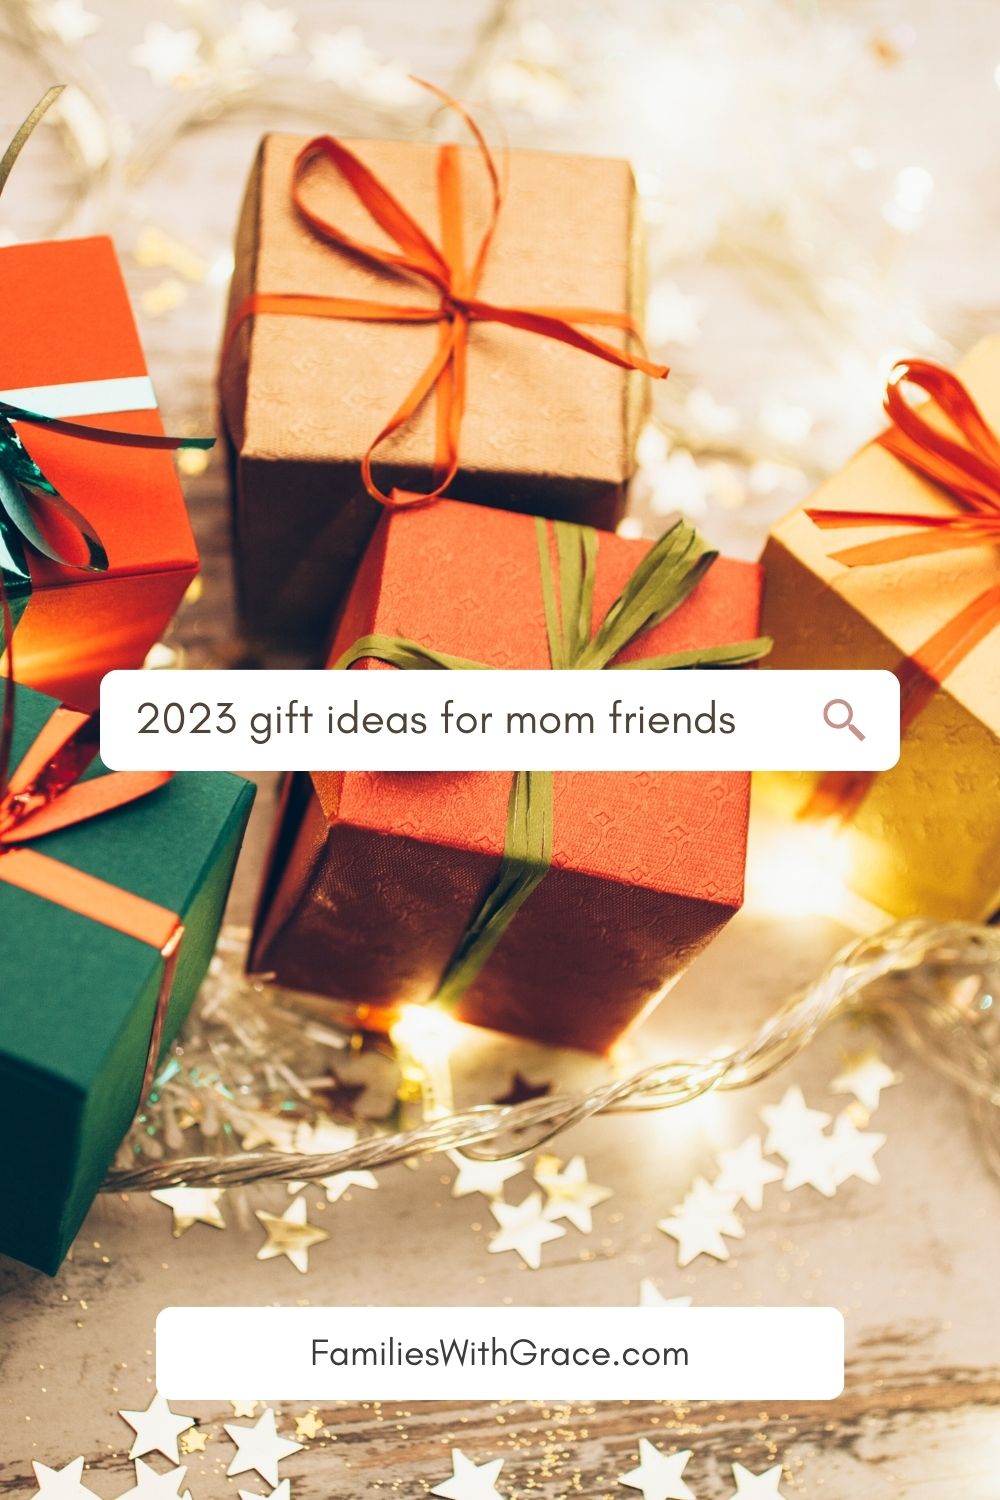 The Best Holiday Gifts for Mom Friends in 2023